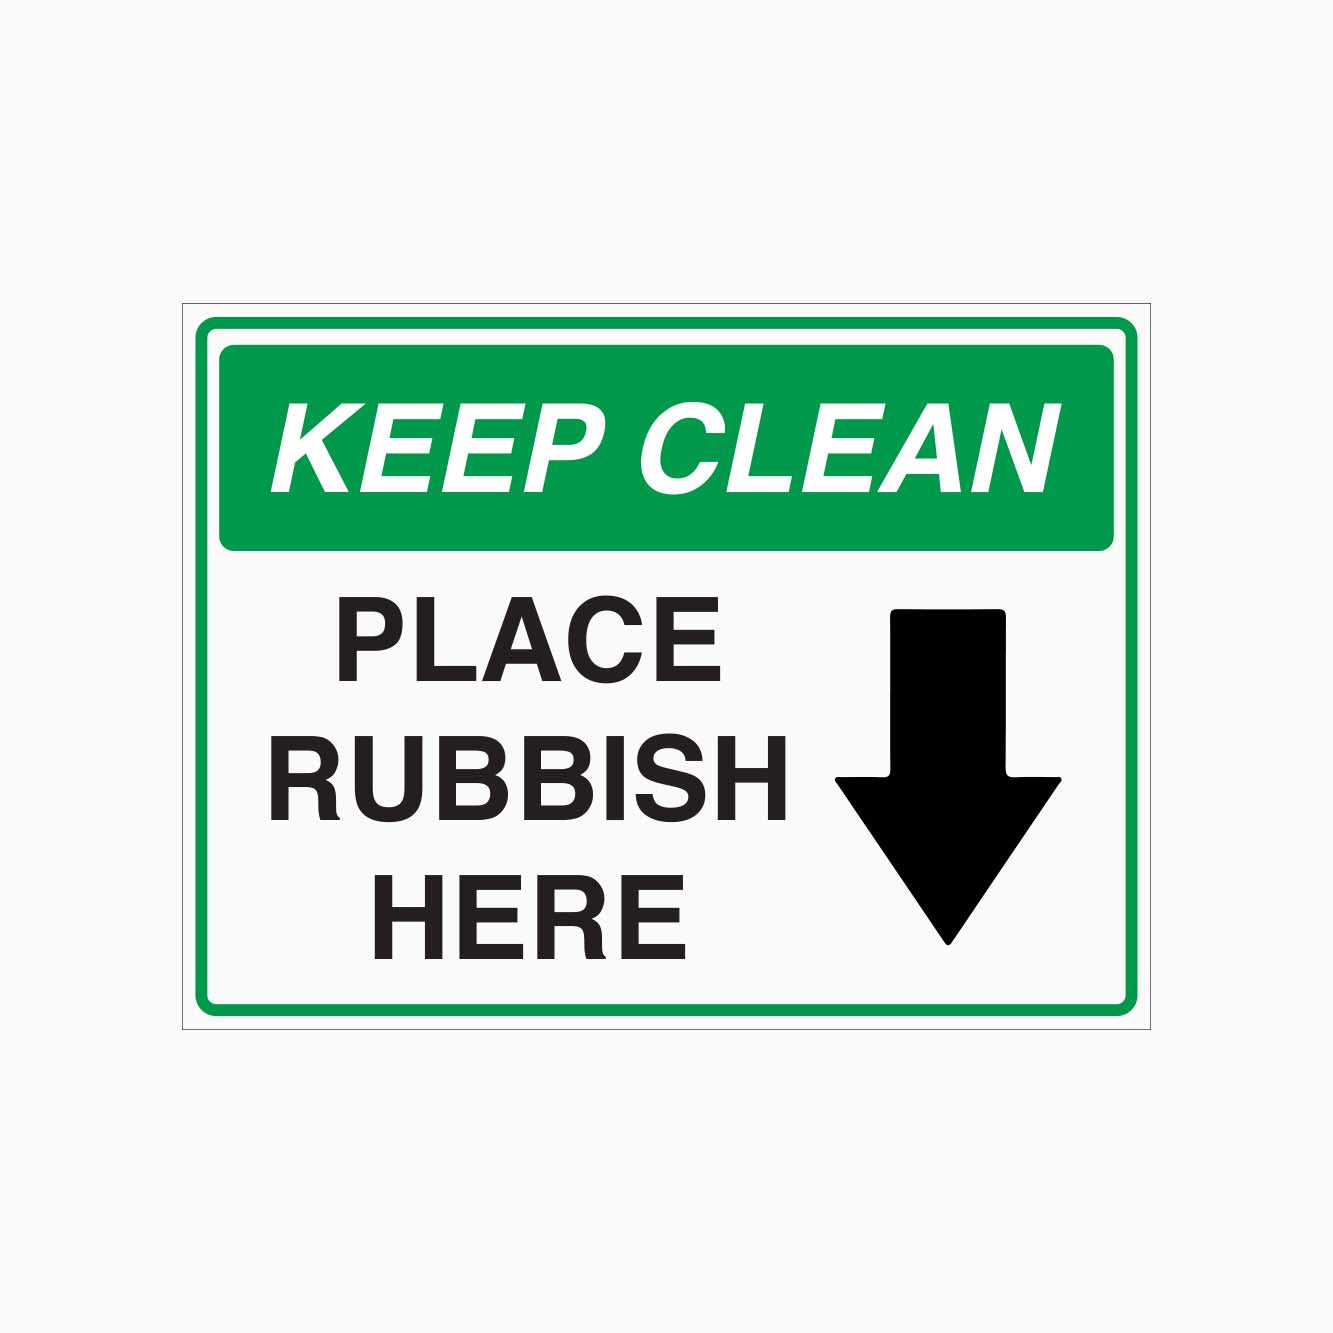 KEEP CLEAN PLACE RUBBISH HERE SIGN - GET SIGNS